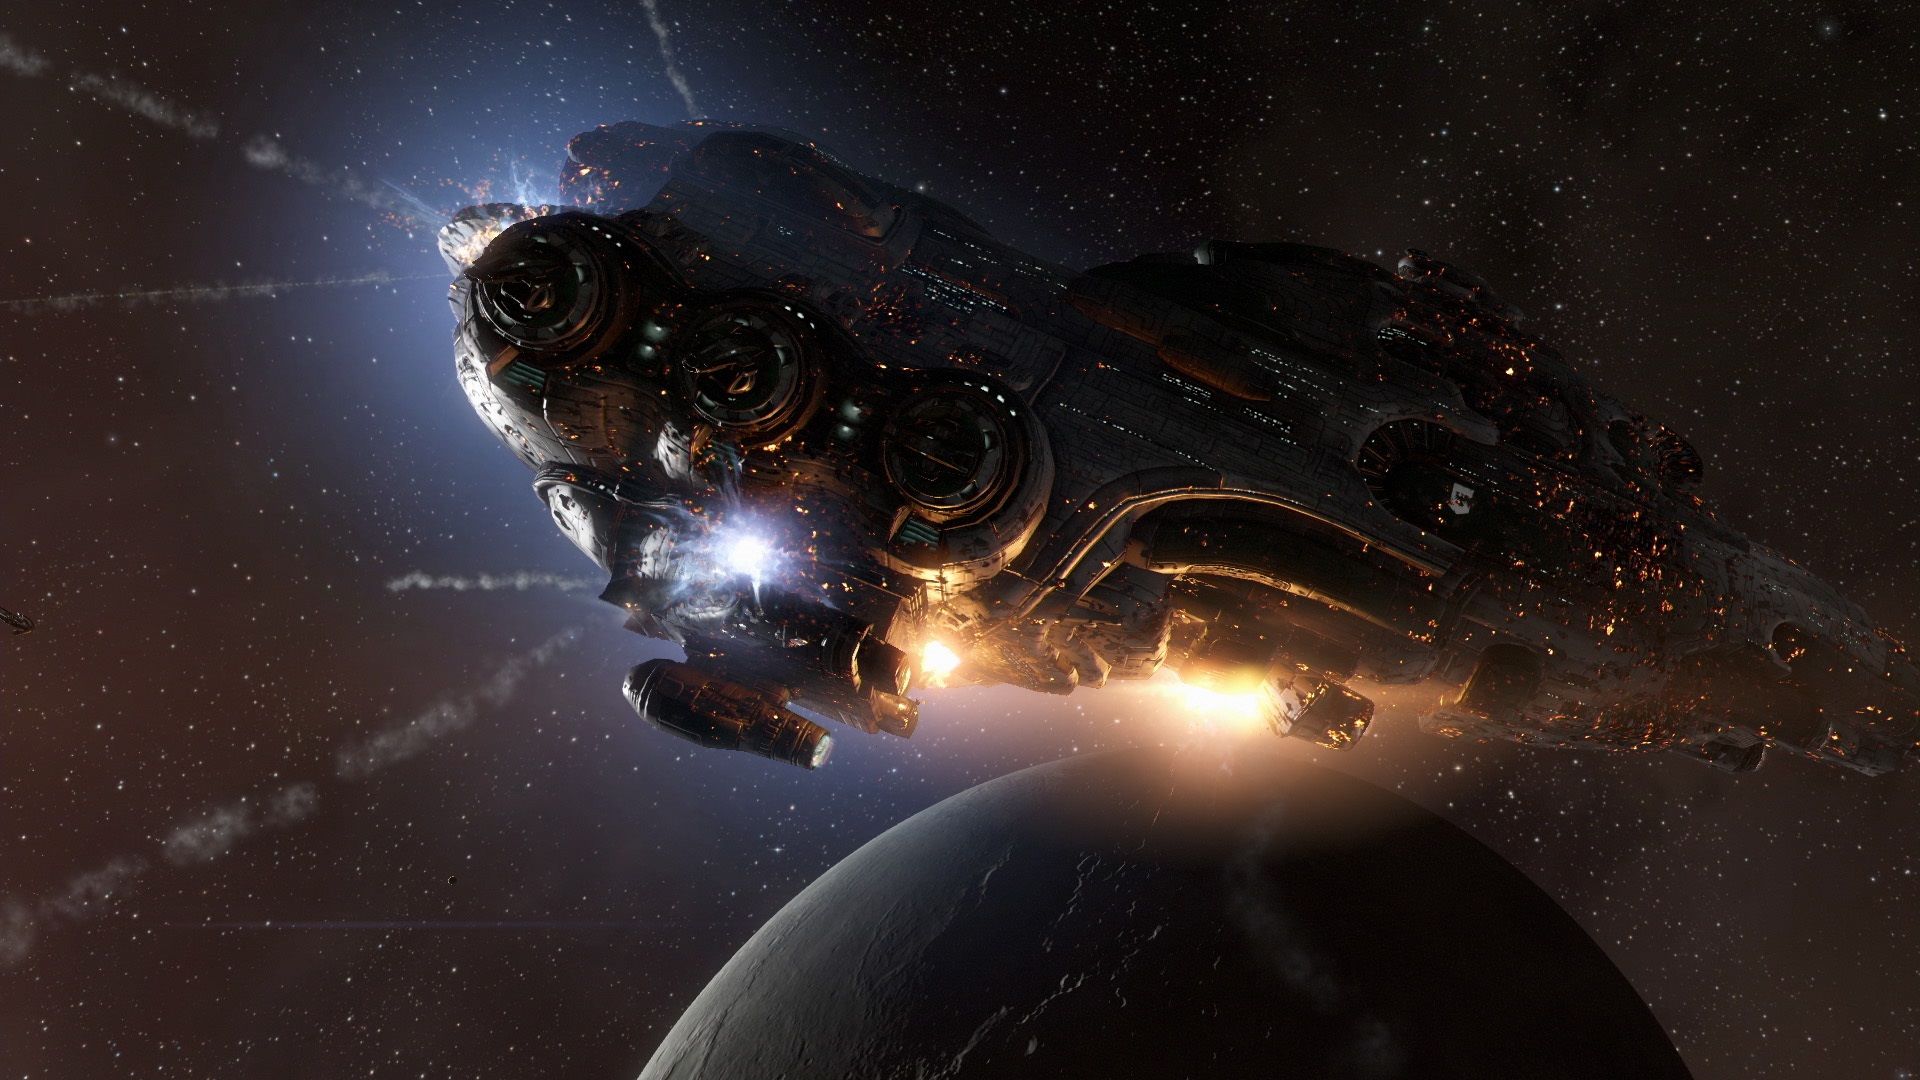 Best free PC games: EVE Online. Image shows a huge ship flying through space.